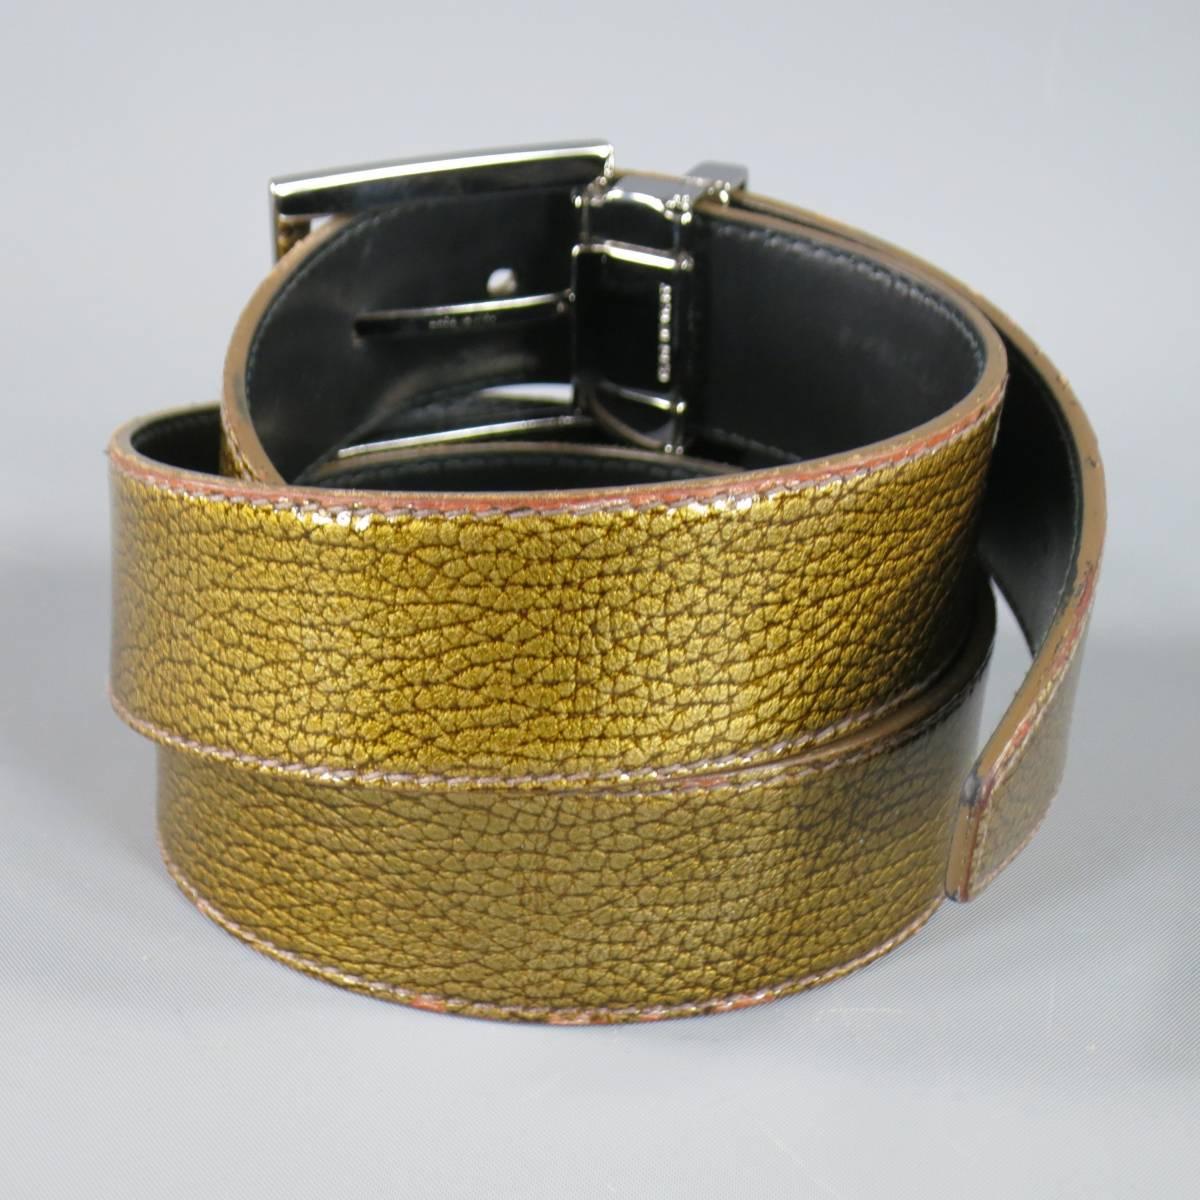 DOLCE & GABBANA dress belt is Italian leather and features an iridescent metallic upper and brand engraved plaquer in gold. Faint blemish near buckle. Made in Italy.
 
Good Pre-Owned Condition    Marked: 44
 
Measurements:
 
Length: 44